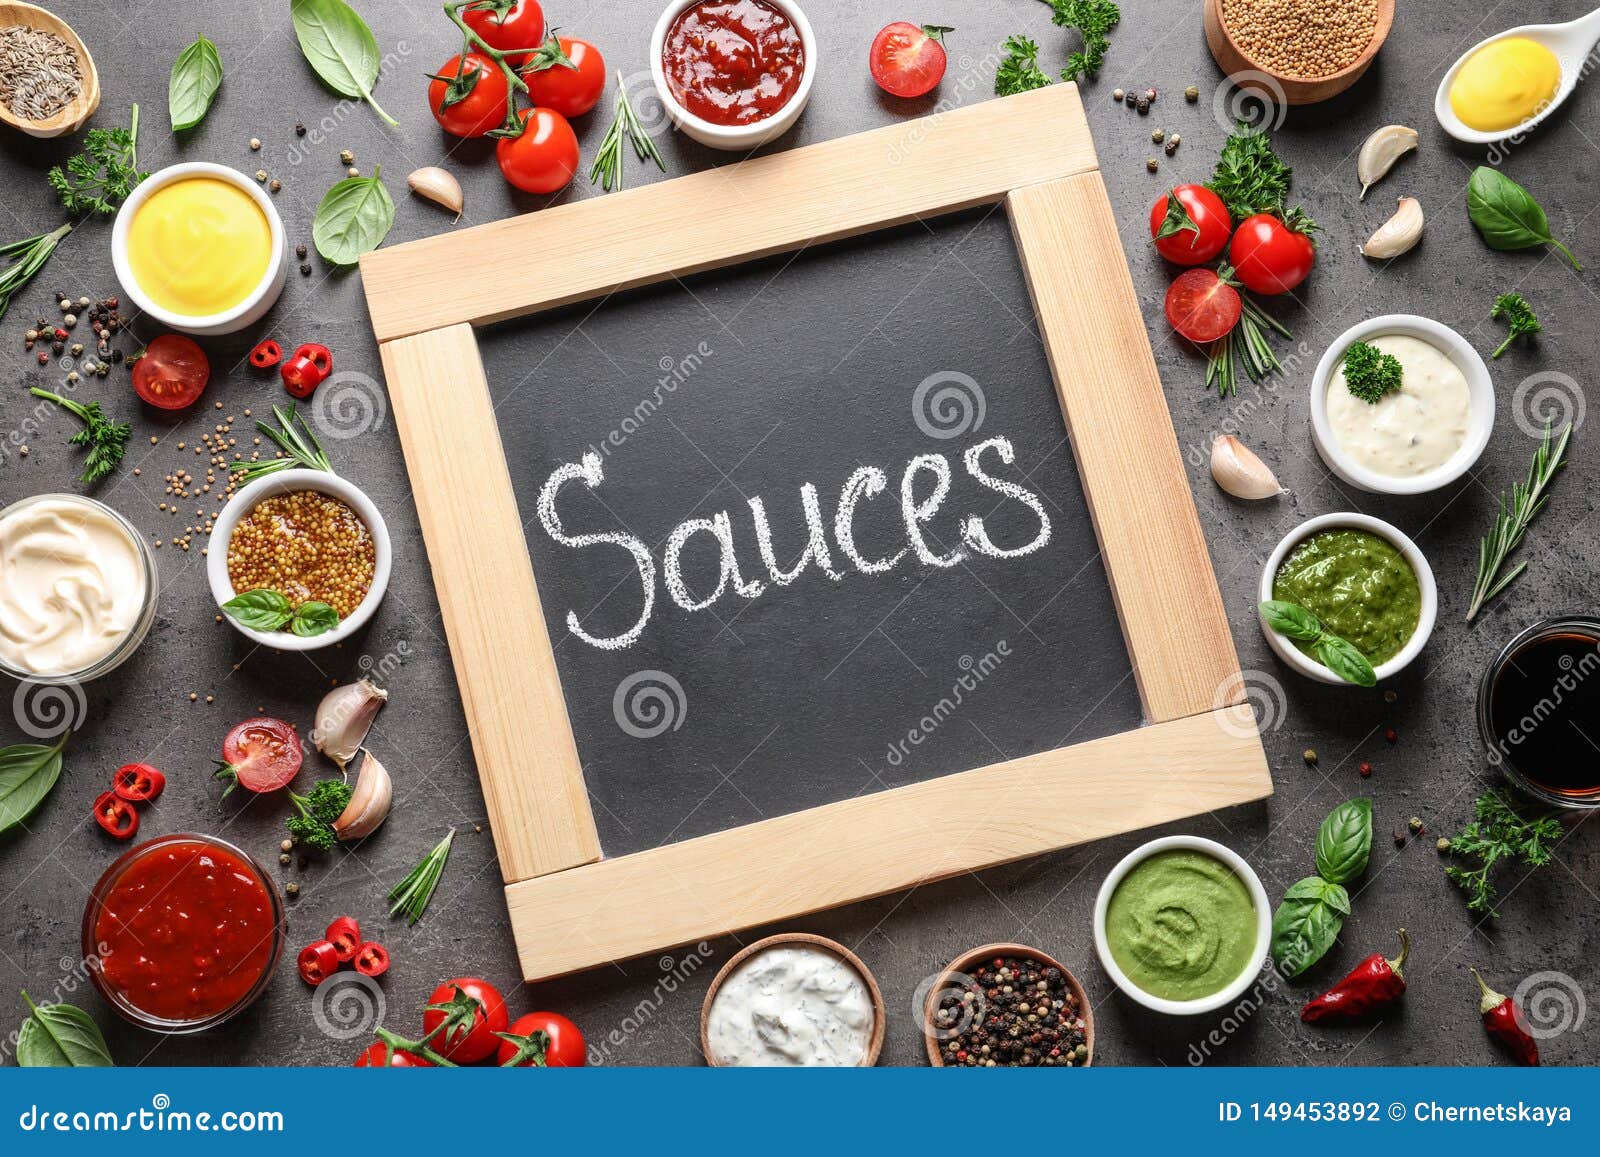 small blackboard with word sauces and different dressings on gray background